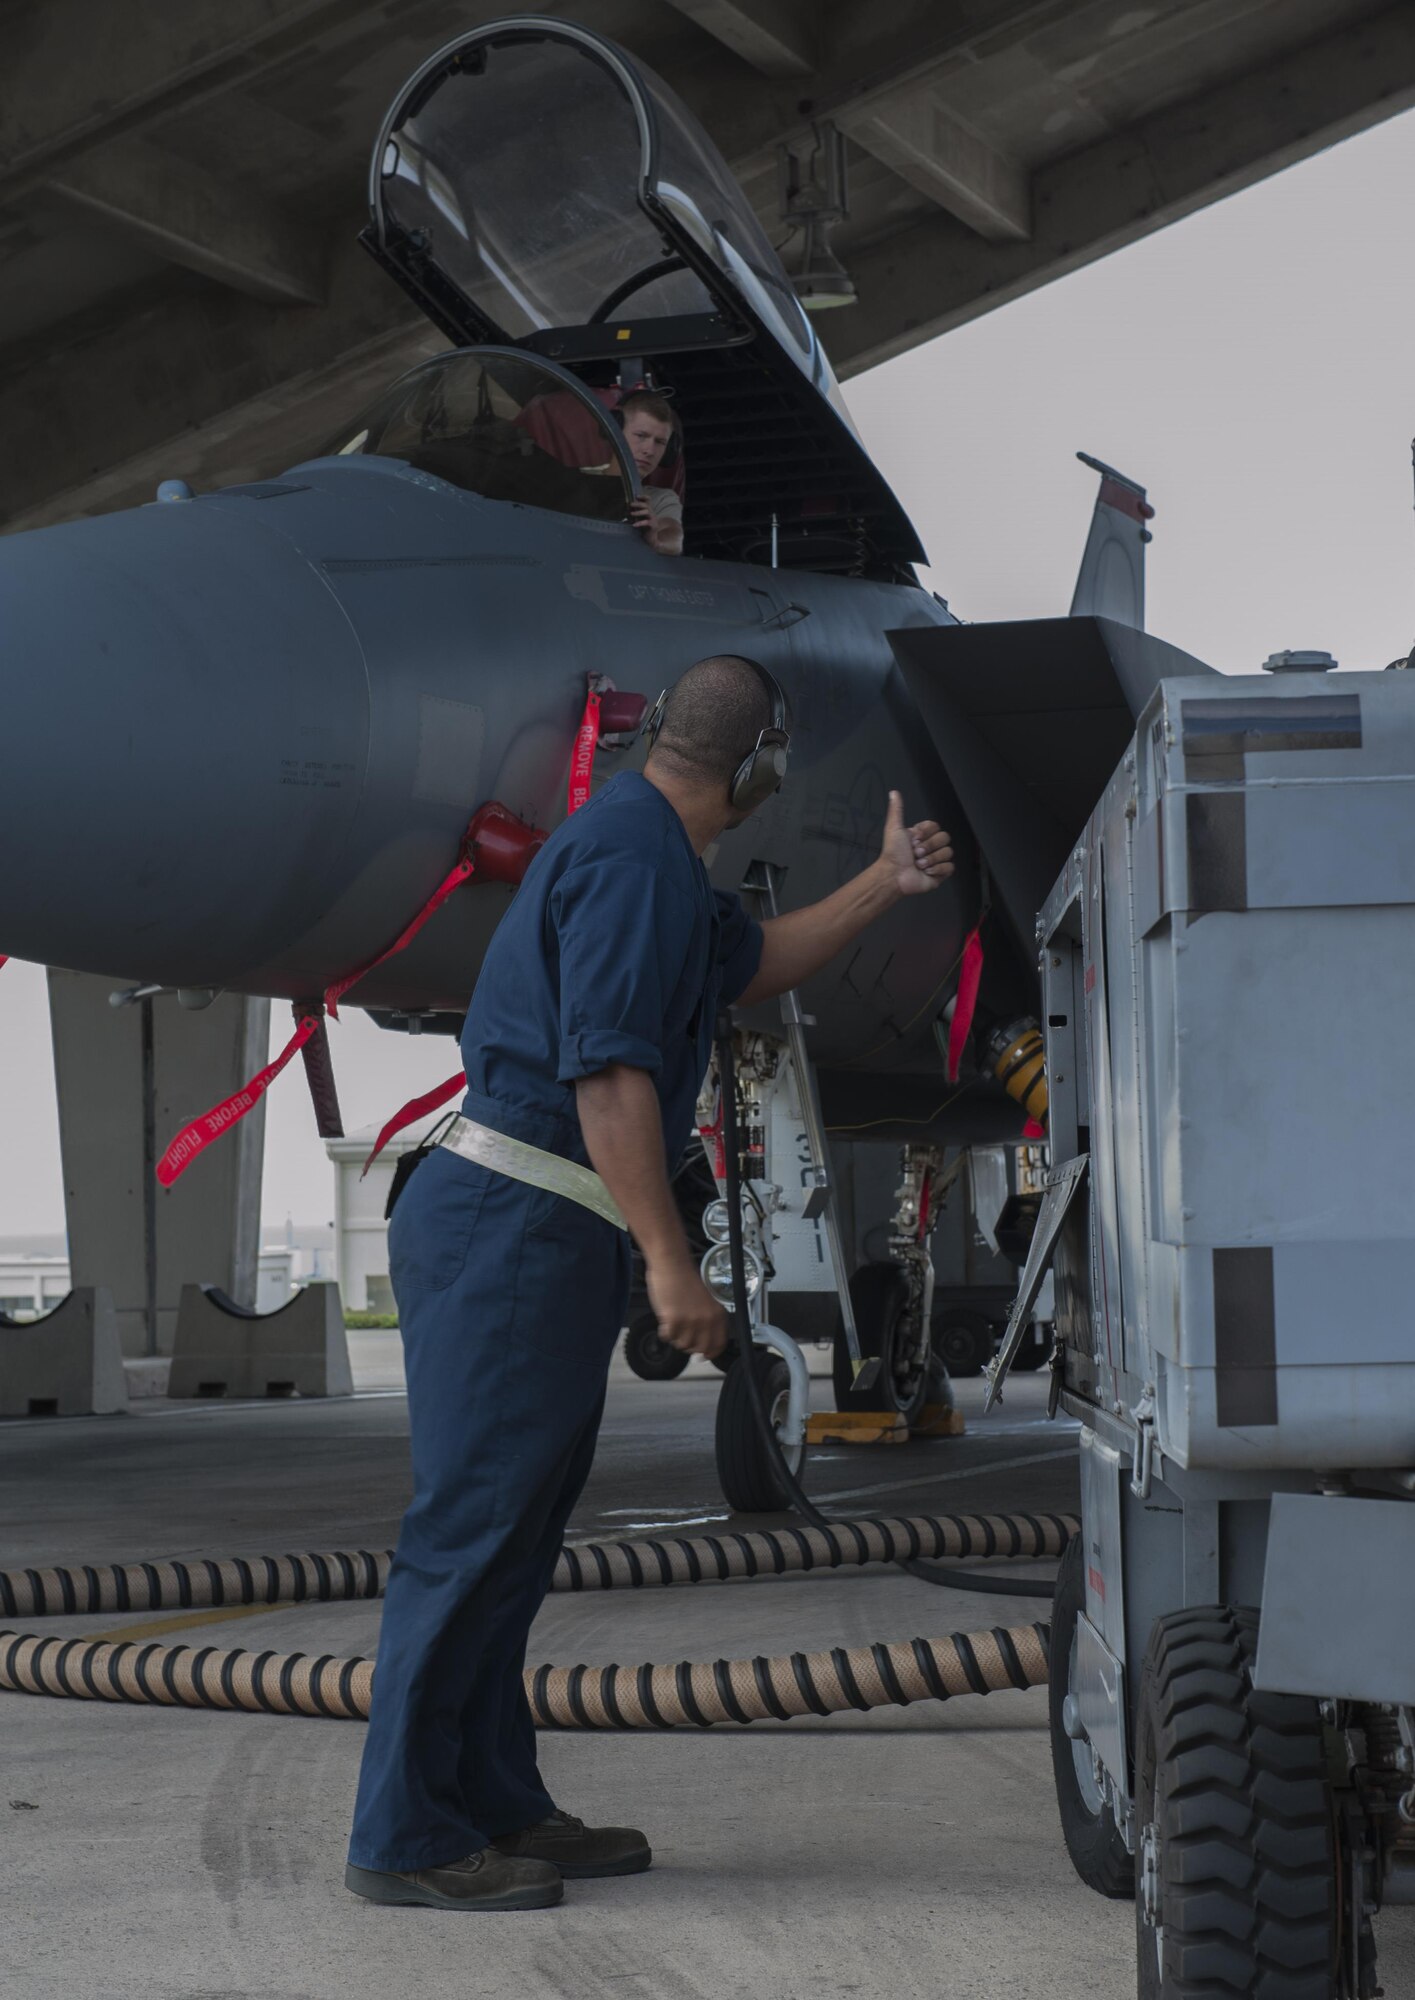 U.S. Air Force Airman 1st Class Brandon Martel, 67th Aircraft Maintenance Unit avionics technician apprentice, signals to Senior Airman Adam Craig, 67th AMU avionics technician journeyman, that the power cart, used to supply power to the F15C Eagle during maintenance, is operating correctly, Dec. 8, 2015, at Kadena Air Base, Japan. Teamwork is a vital part of the operational checks the 67th AMU completes daily. (U.S. Air Force photo by Airman Zackary A. Henry)